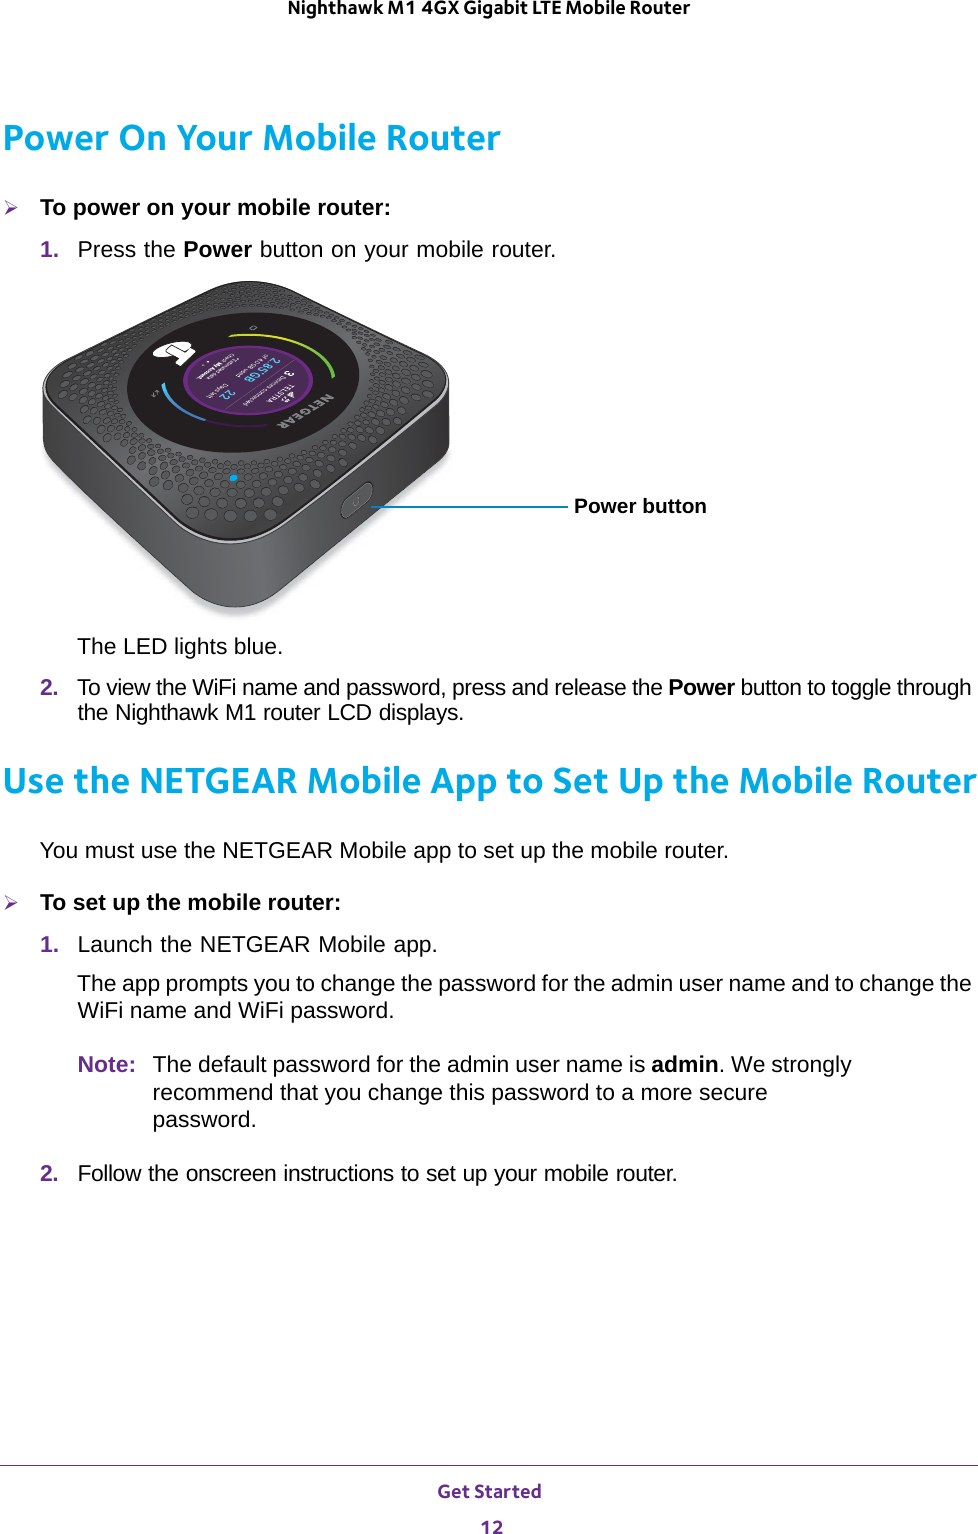 Get Started 12Nighthawk M1 4GX Gigabit LTE Mobile Router Power On Your Mobile RouterTo power on your mobile router:1.  Press the Power button on your mobile router.Power buttonThe LED lights blue.2.  To view the WiFi name and password, press and release the Power button to toggle through the Nighthawk M1 router LCD displays.Use the NETGEAR Mobile App to Set Up the Mobile RouterYou must use the NETGEAR Mobile app to set up the mobile router.To set up the mobile router:1.  Launch the NETGEAR Mobile app.The app prompts you to change the password for the admin user name and to change the WiFi name and WiFi password.Note: The default password for the admin user name is admin. We strongly recommend that you change this password to a more secure password.2.  Follow the onscreen instructions to set up your mobile router.